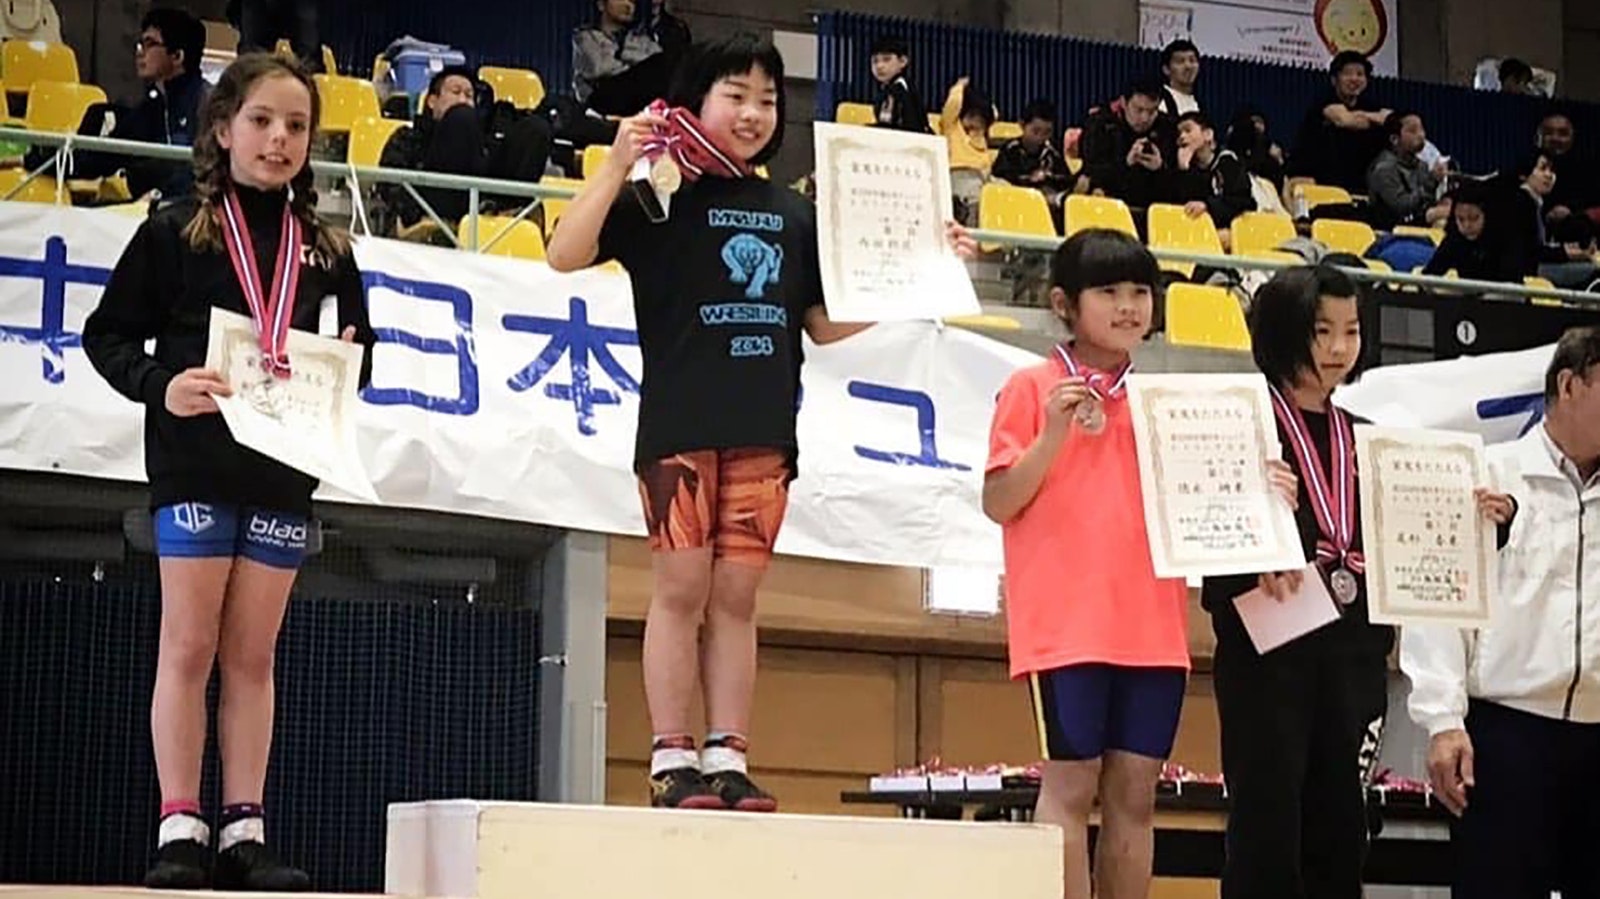 A tiny Tai McBride on the podium of a tournament in Japan.